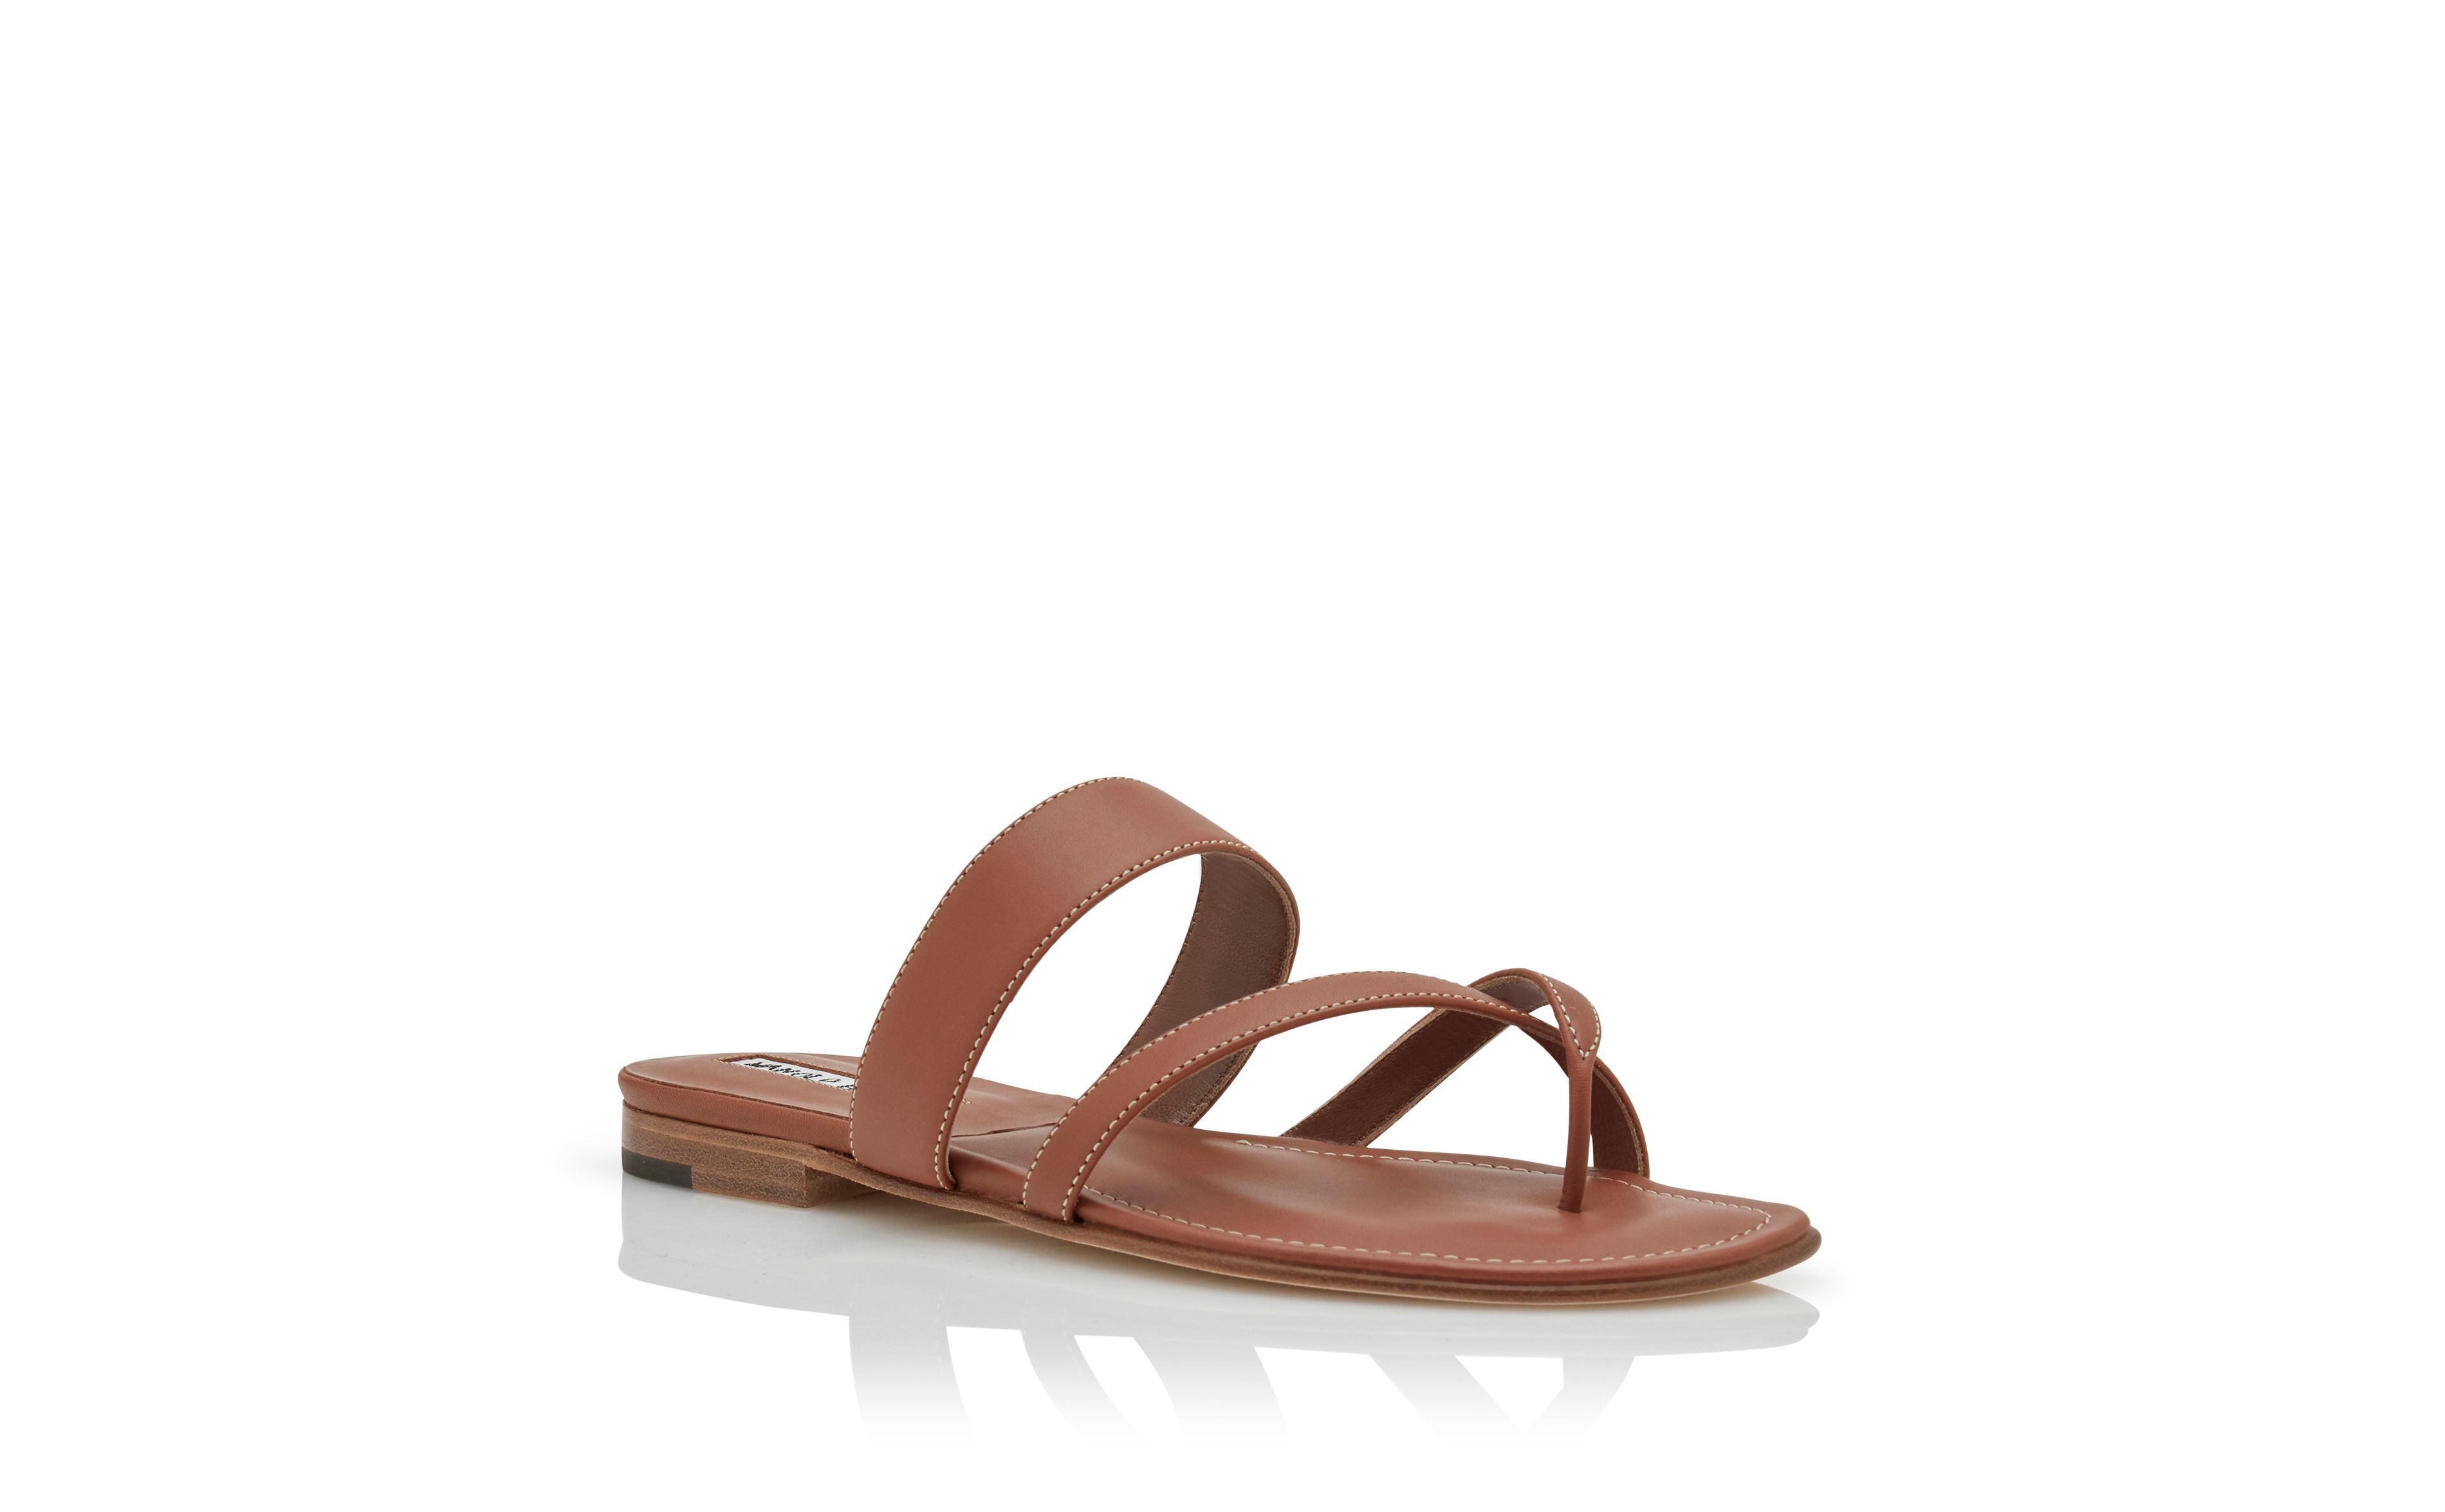 Designer Brown Calf Leather Crossover Flat Sandals - Image Upsell